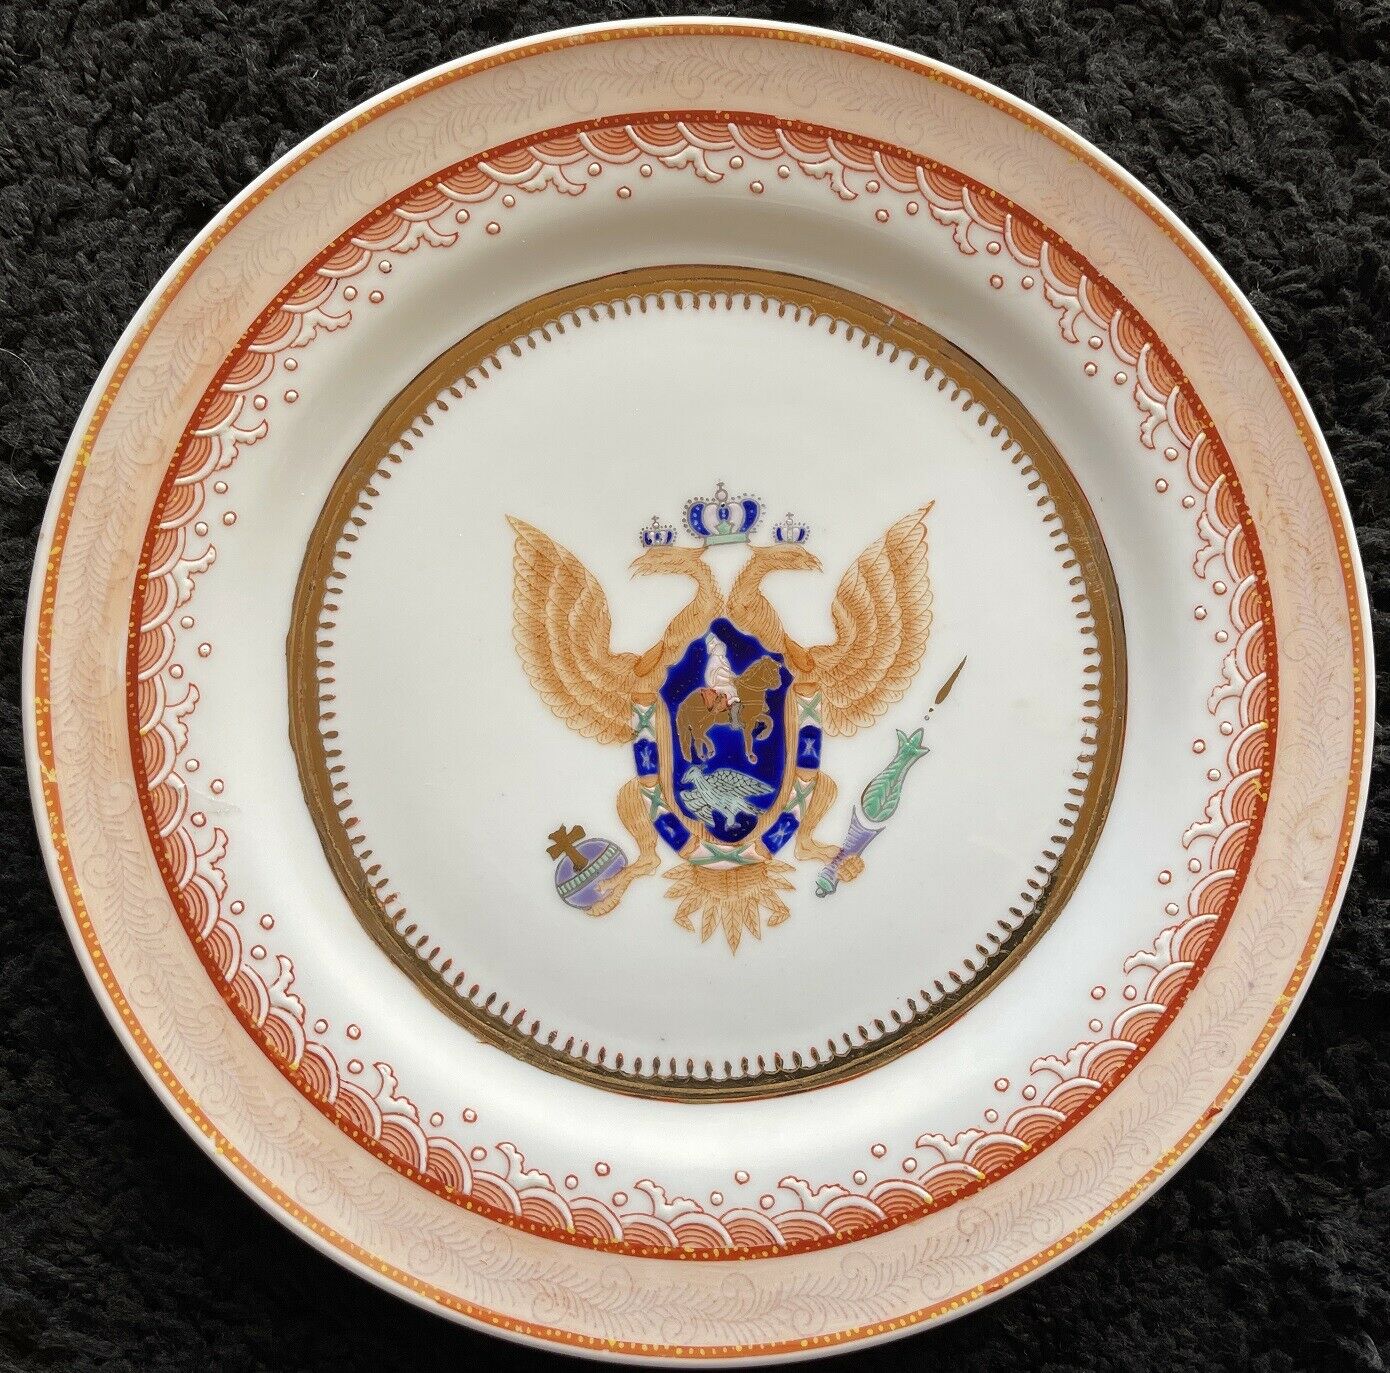 Antique Heraldic Armorial Plate, hand painted double-headed empire eagle Romanov